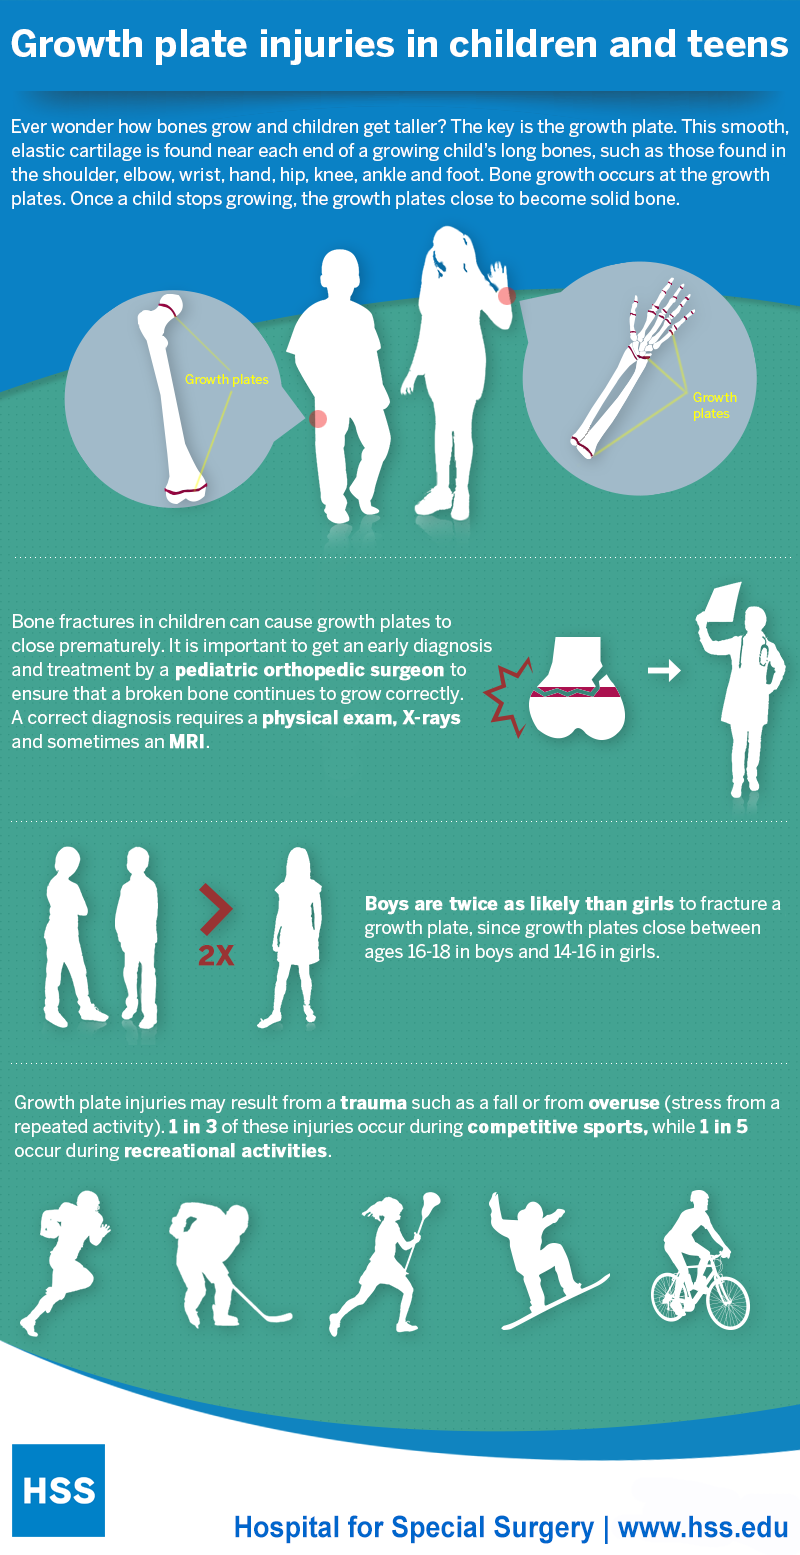 Growth plate injuries in children and teens infographic